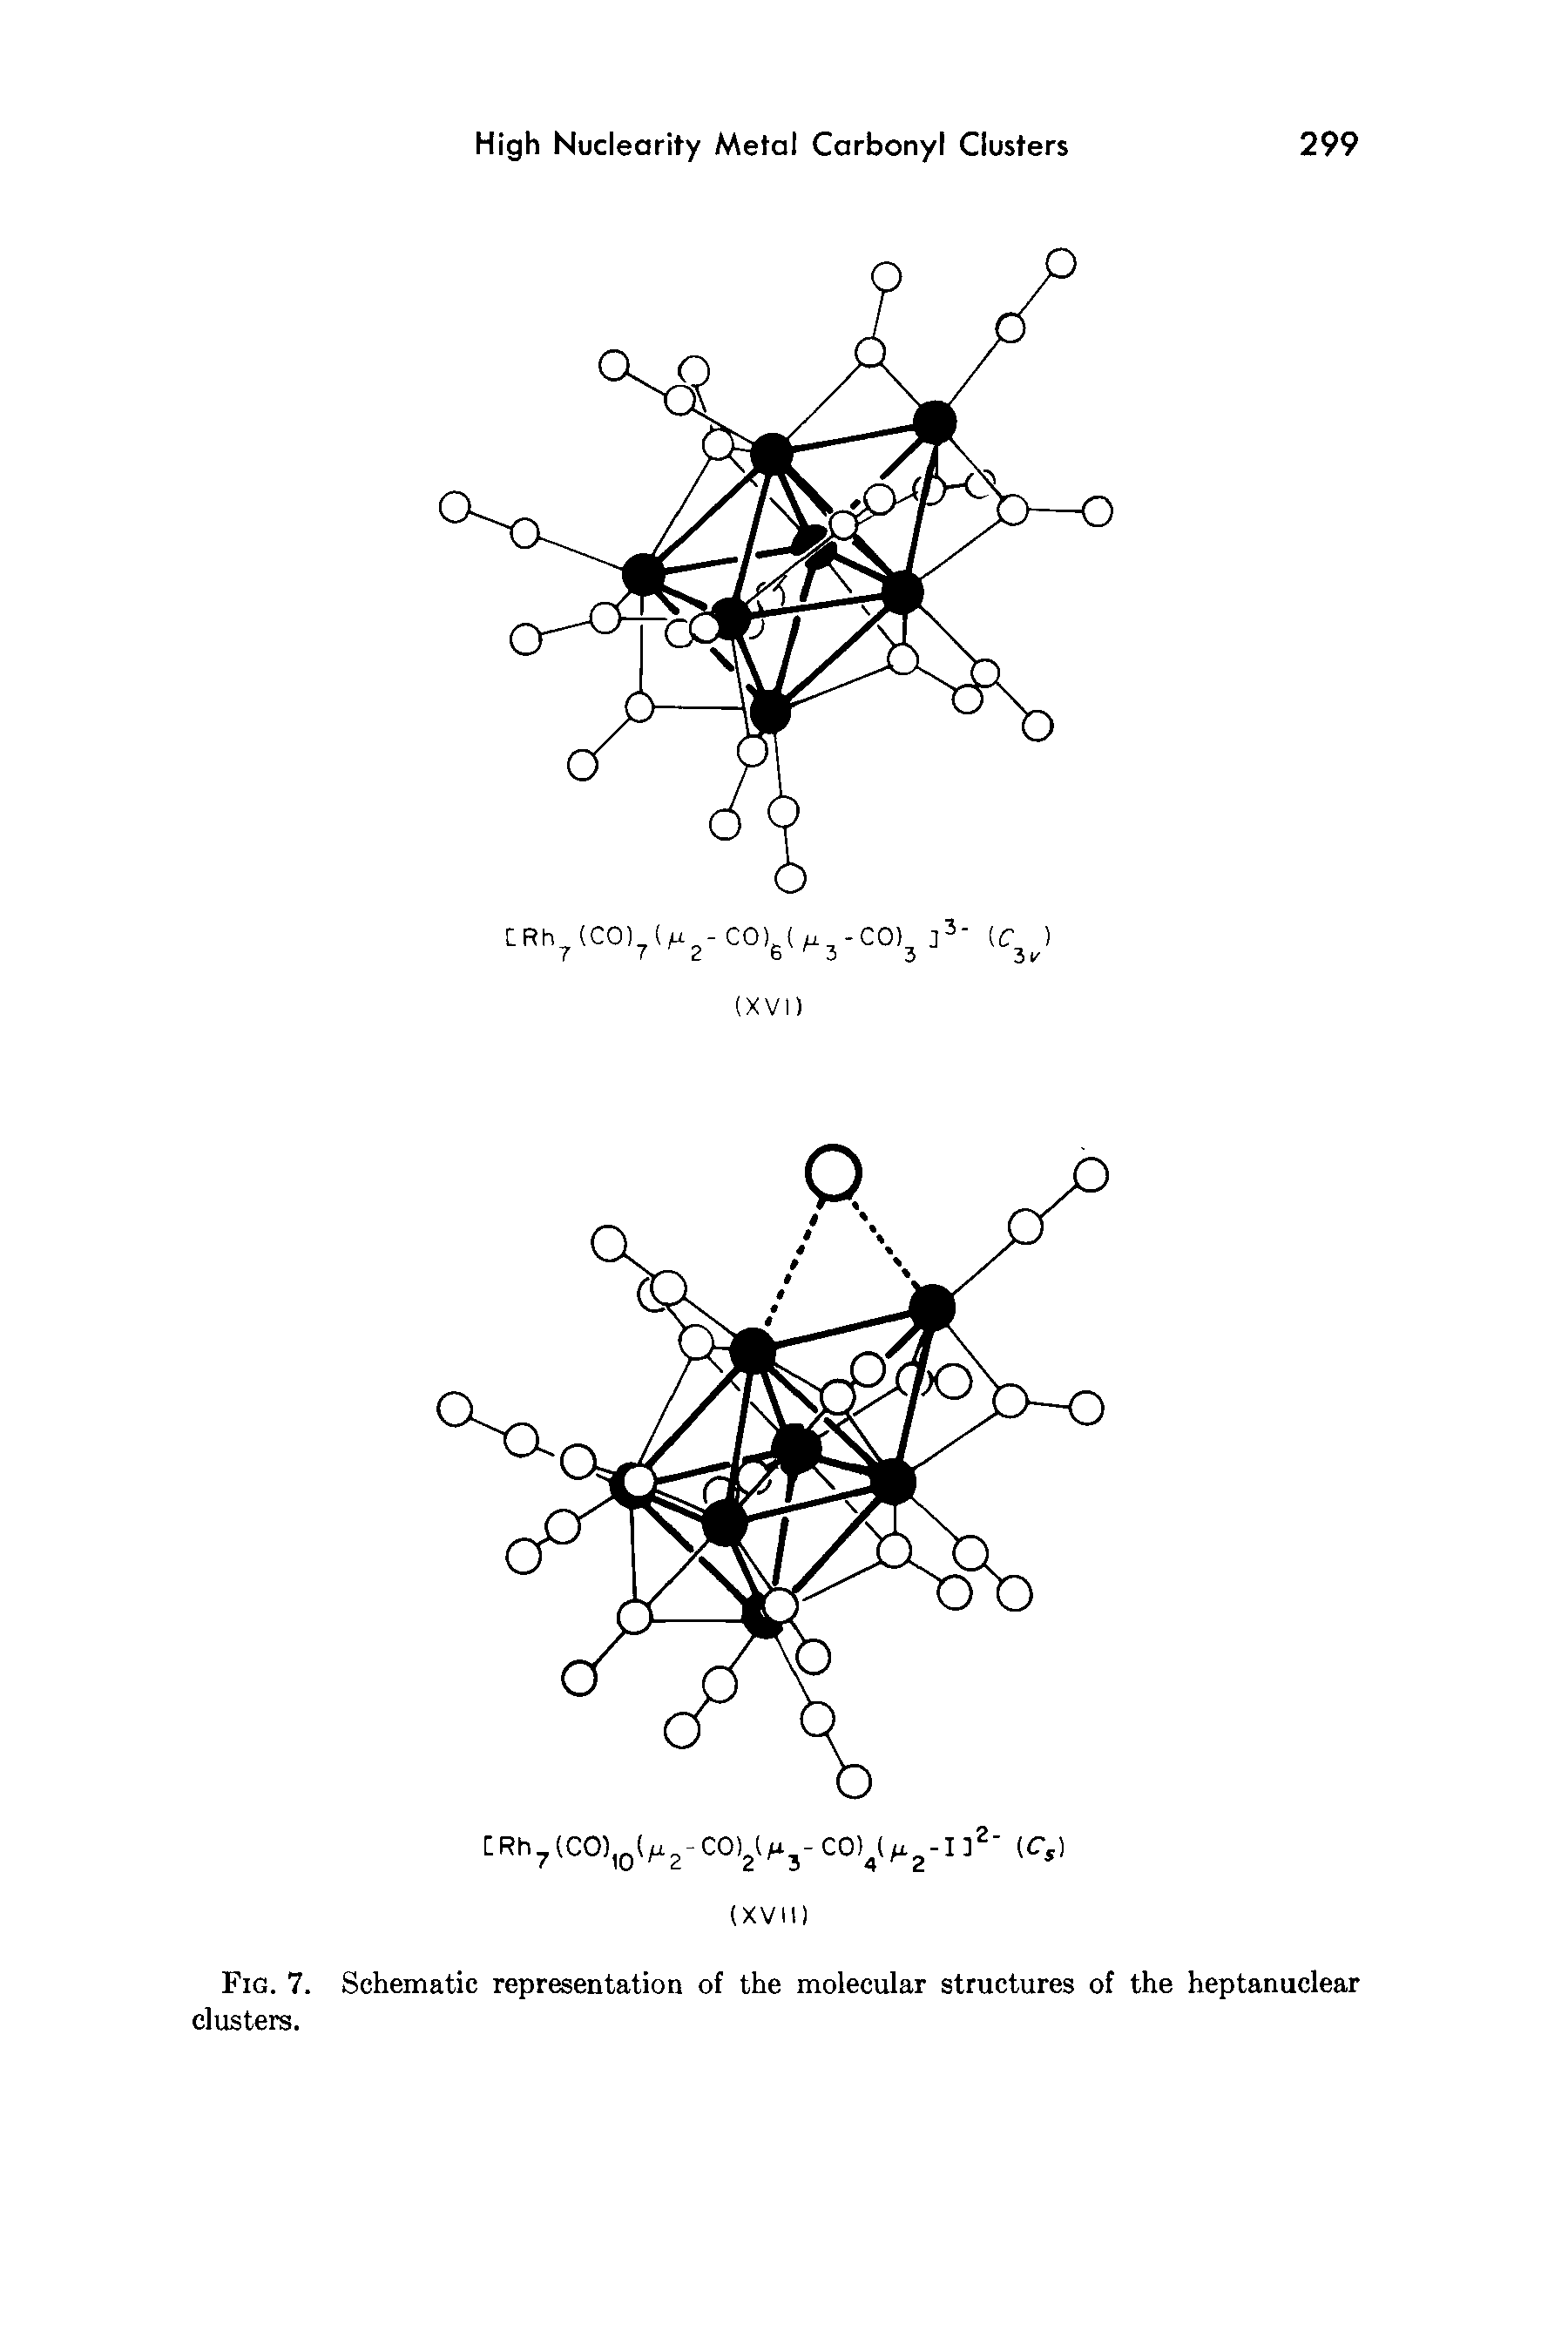 Fig. 7. Schematic representation of the molecular structures of the heptanuclear clusters.